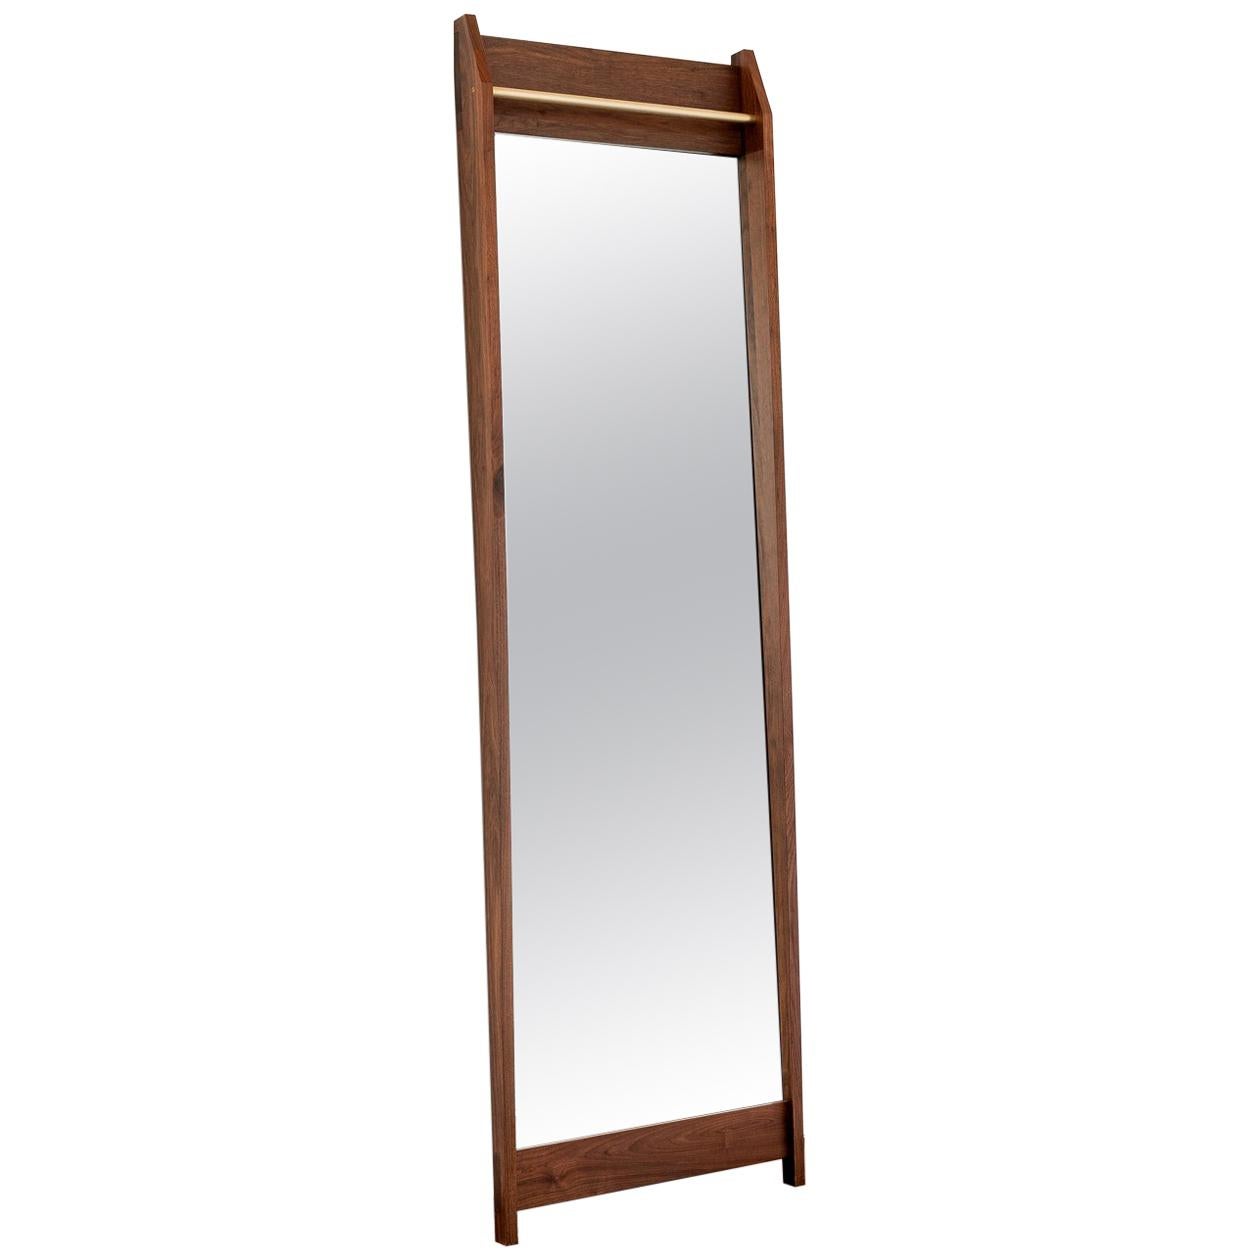 Am1, Solid Walnut Full Length Mirror with Upper Bronze Bar For Sale